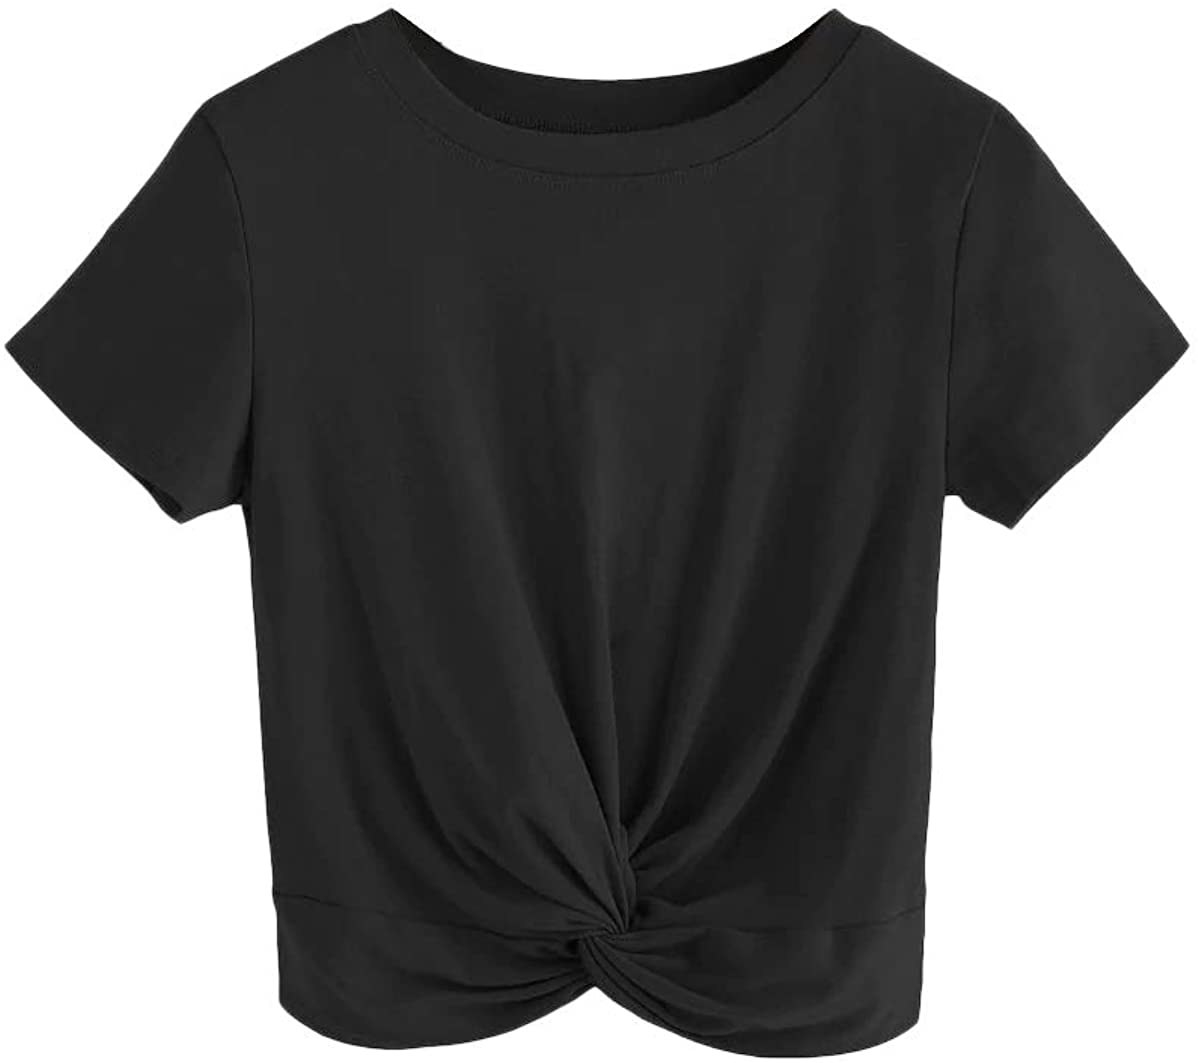 A crop top with a knotted front